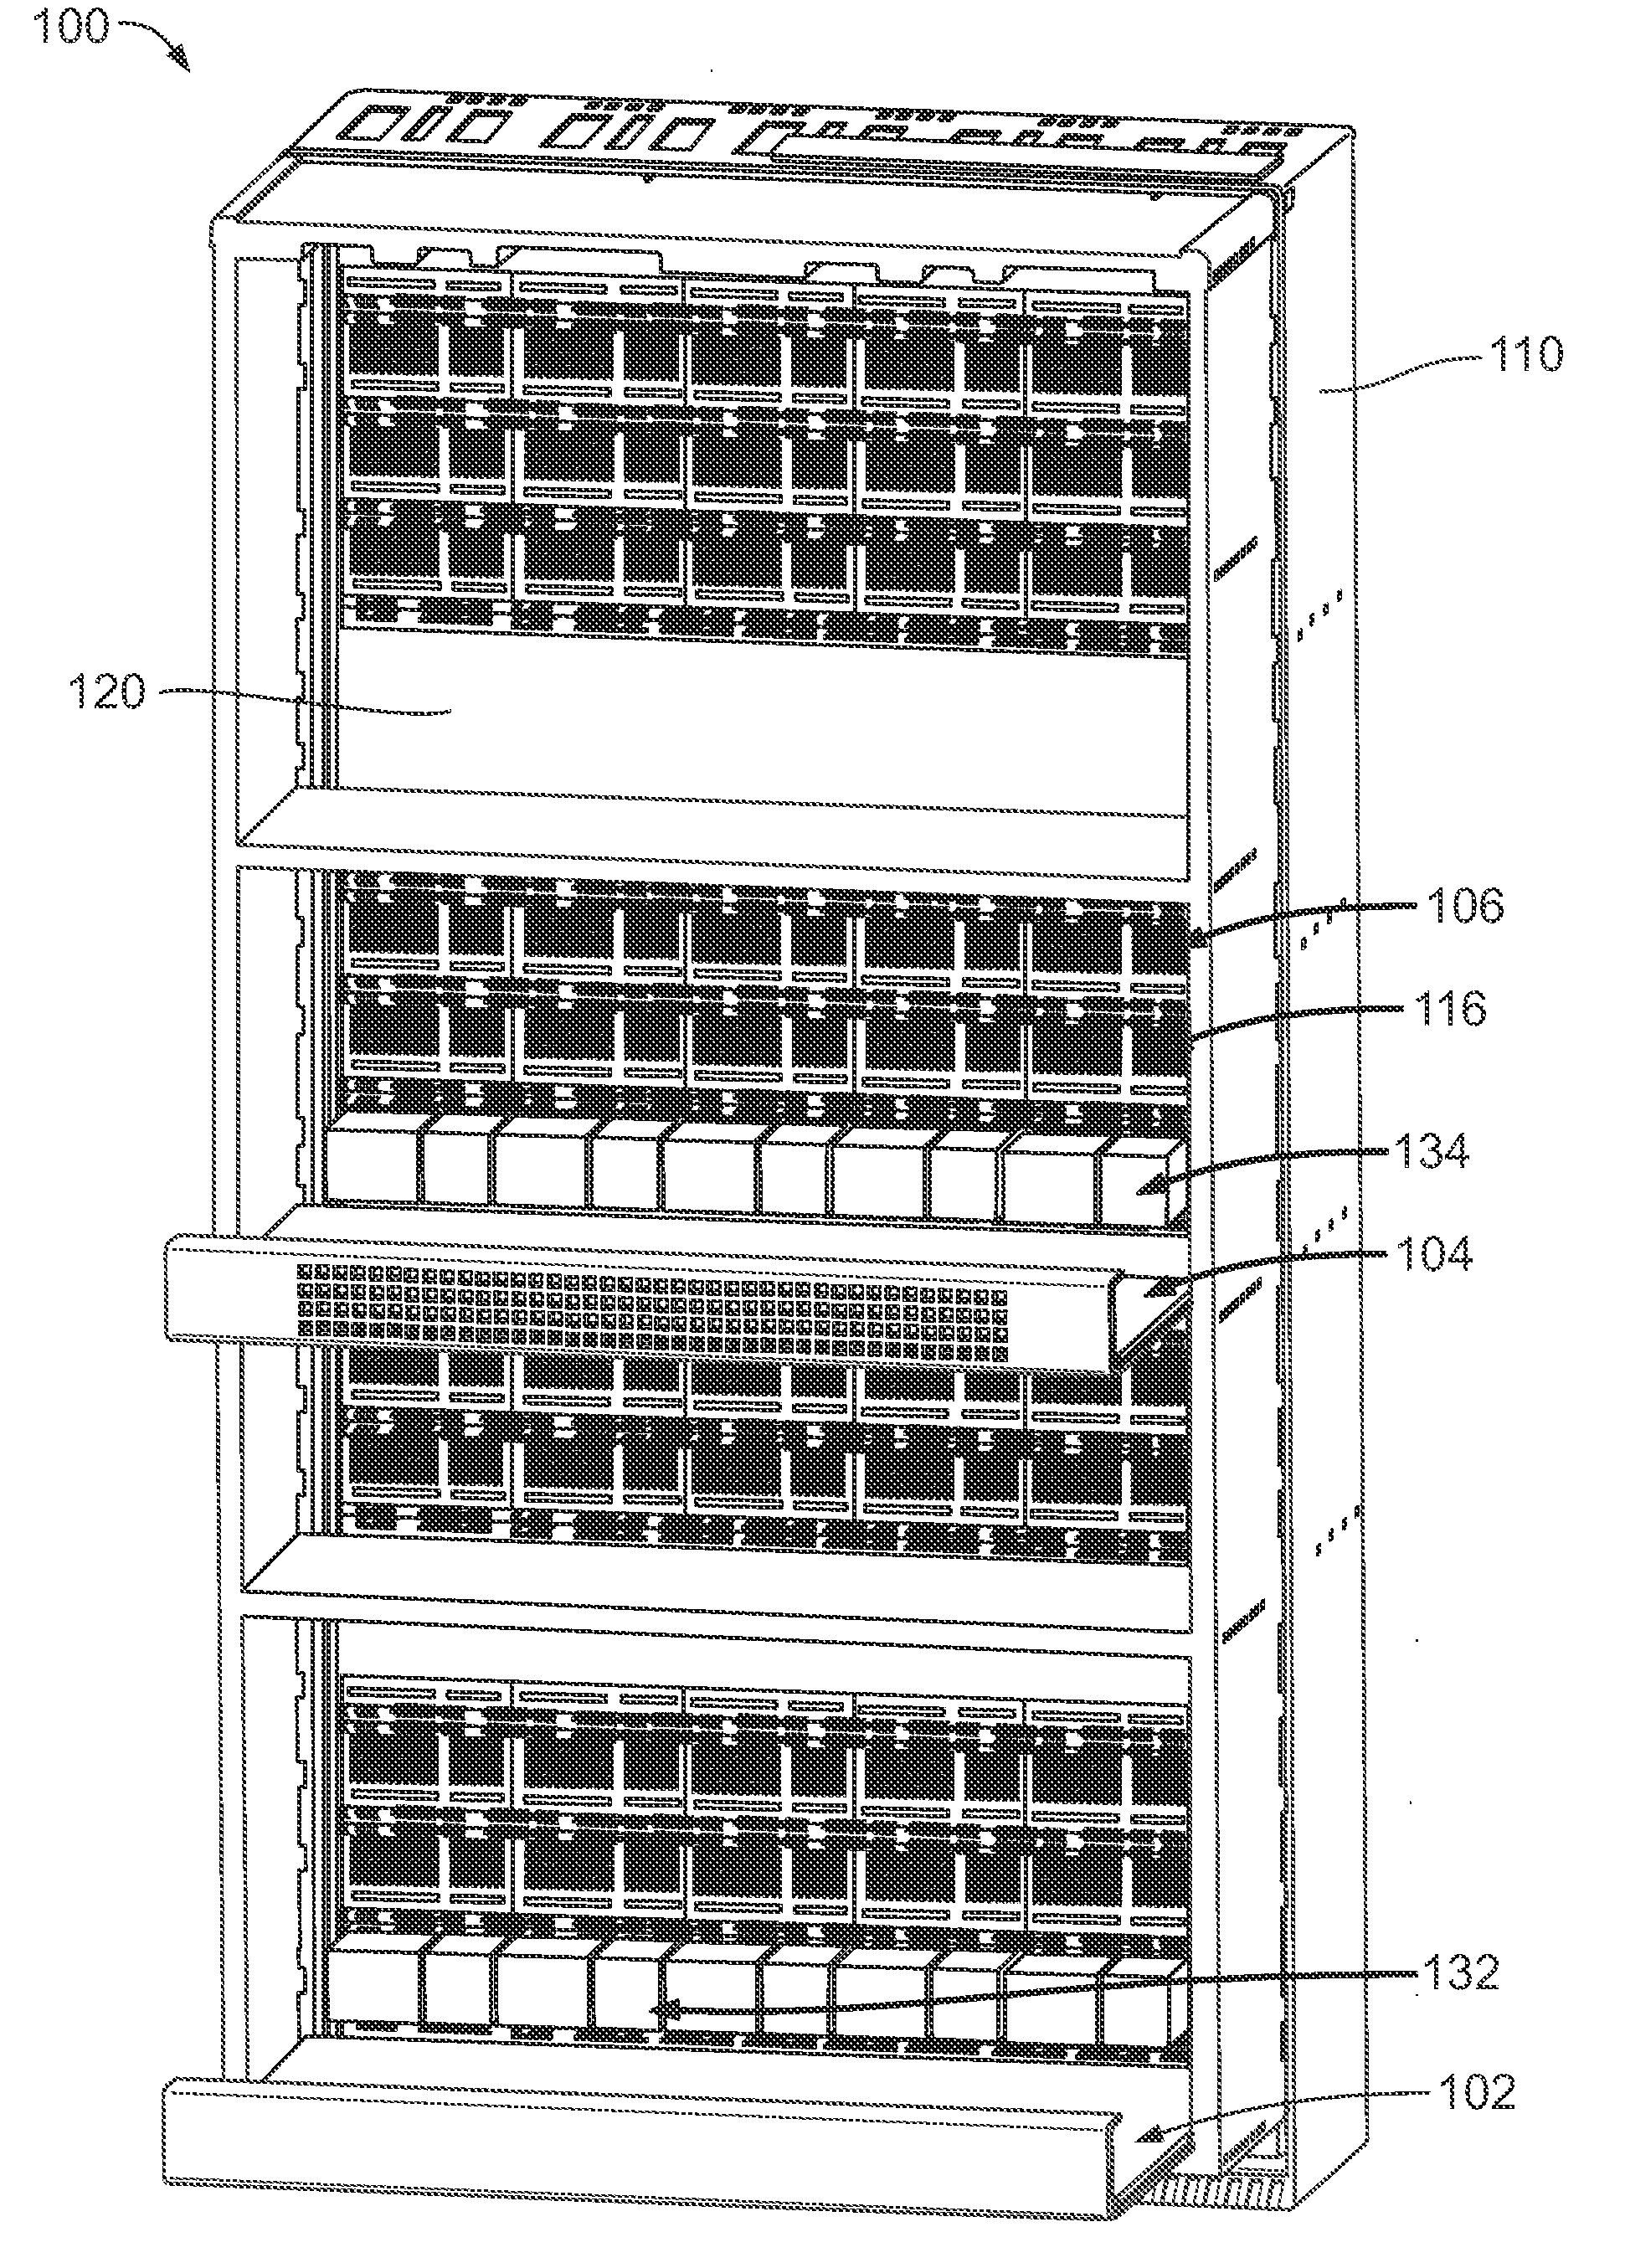 Cable backplane system having locking assemblies